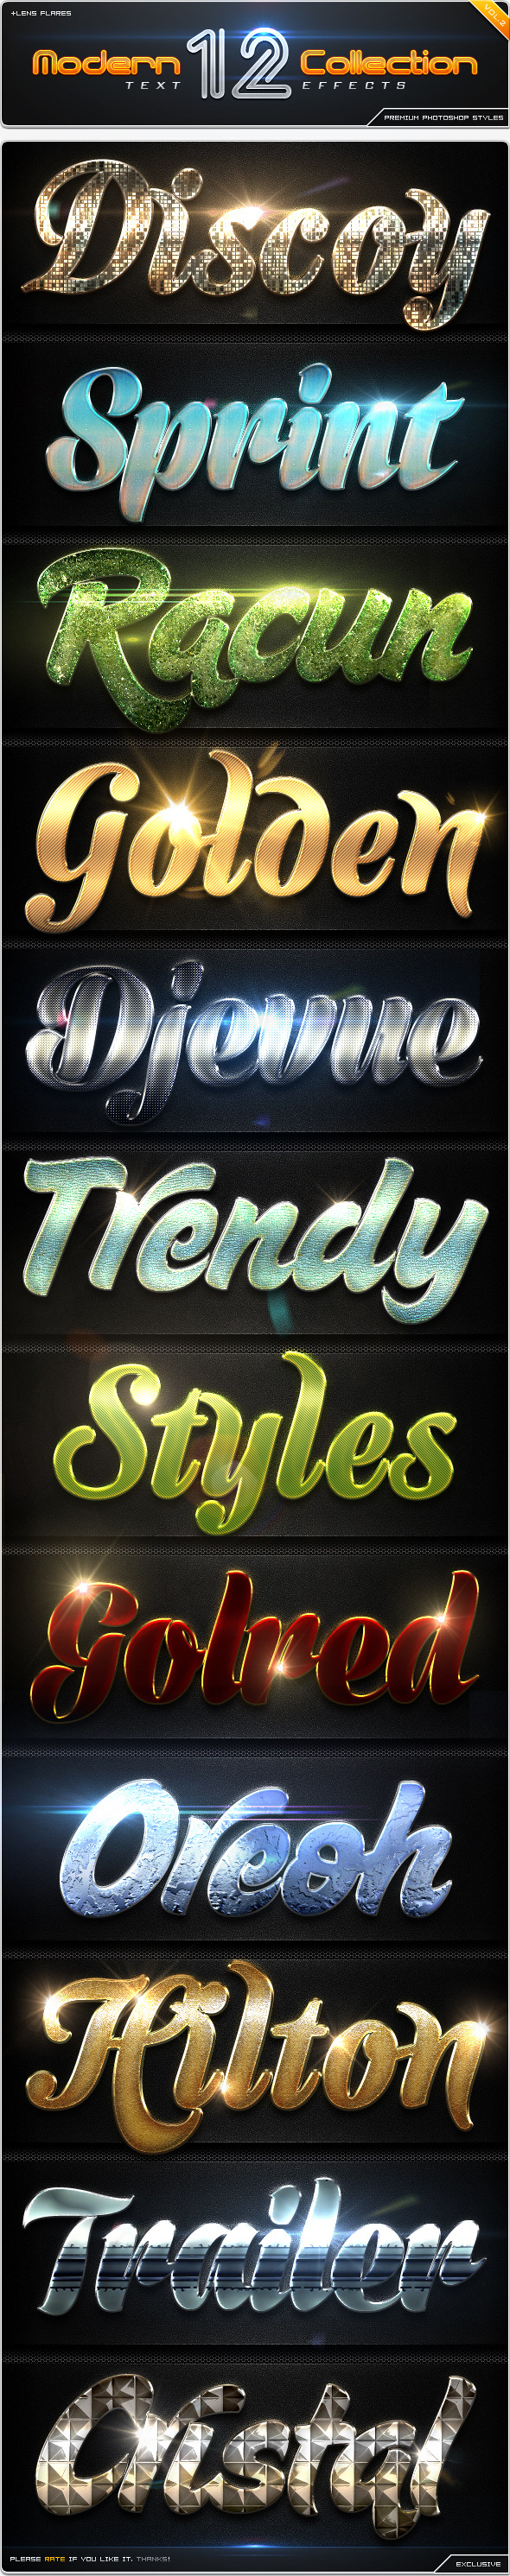 12 Modern Collection Text Effect Styles Vol.2